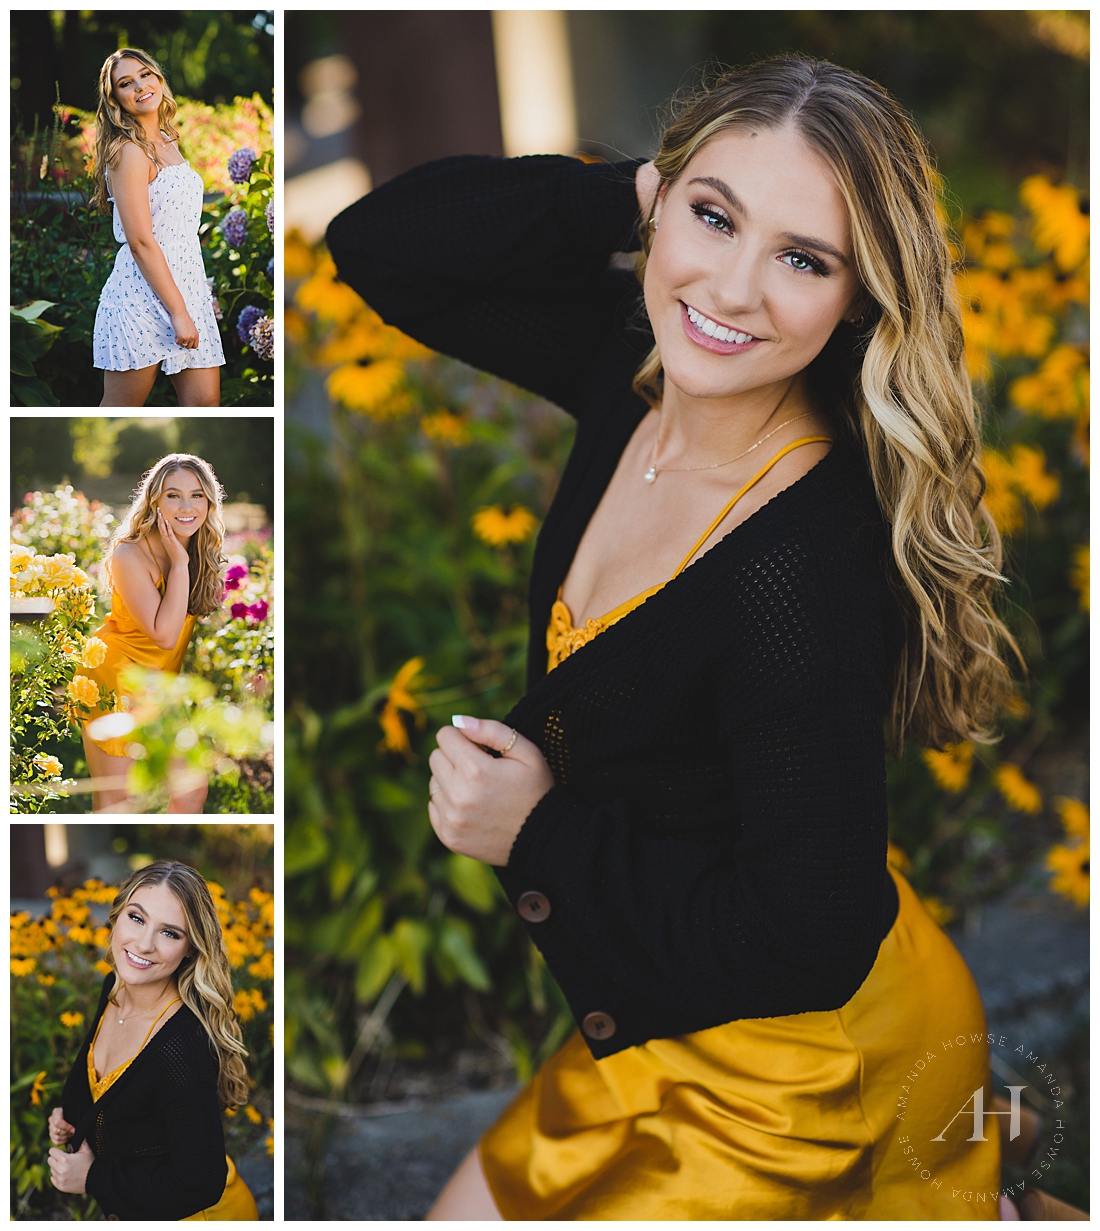 Point Defiance Rose Garden Portraits of High School Senior Girl | How to Style a Silk Slip Dress, Yellow Silk Dress and Black Cardigan, Outfit Inspiration for Outdoor Senior Portraits | Photographed by Tacoma's Best Senior Photographer Amanda Howse | Amanda Howse Photography